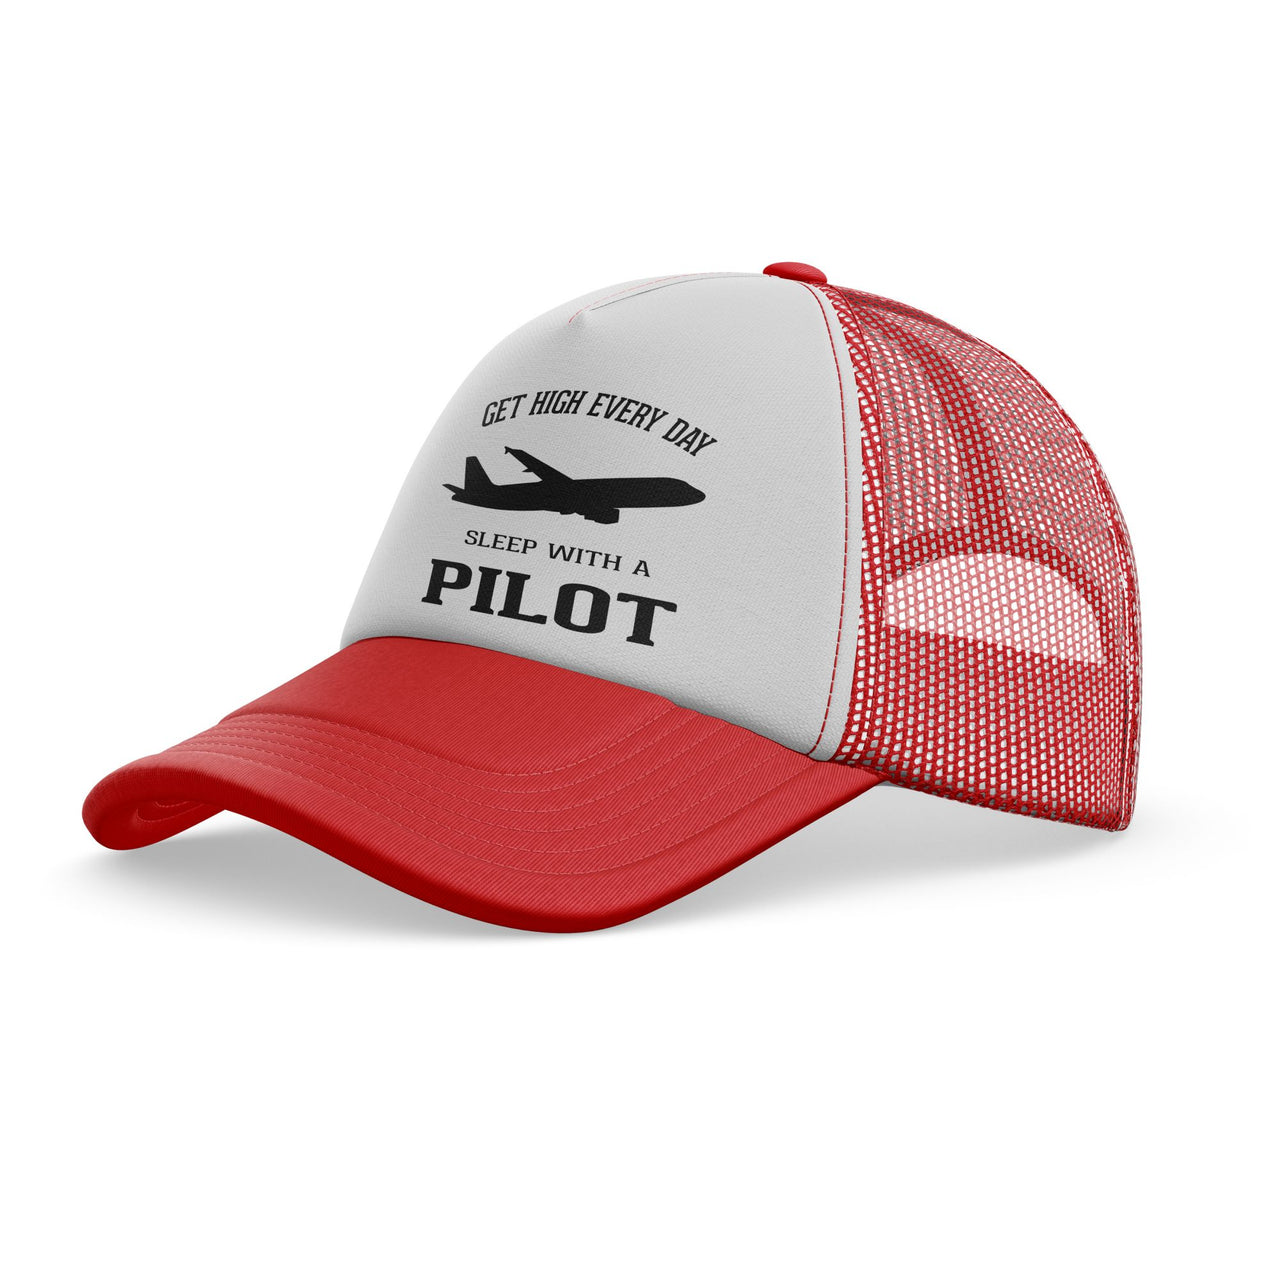 Get High Every Day Sleep With A Pilot Designed Trucker Caps & Hats